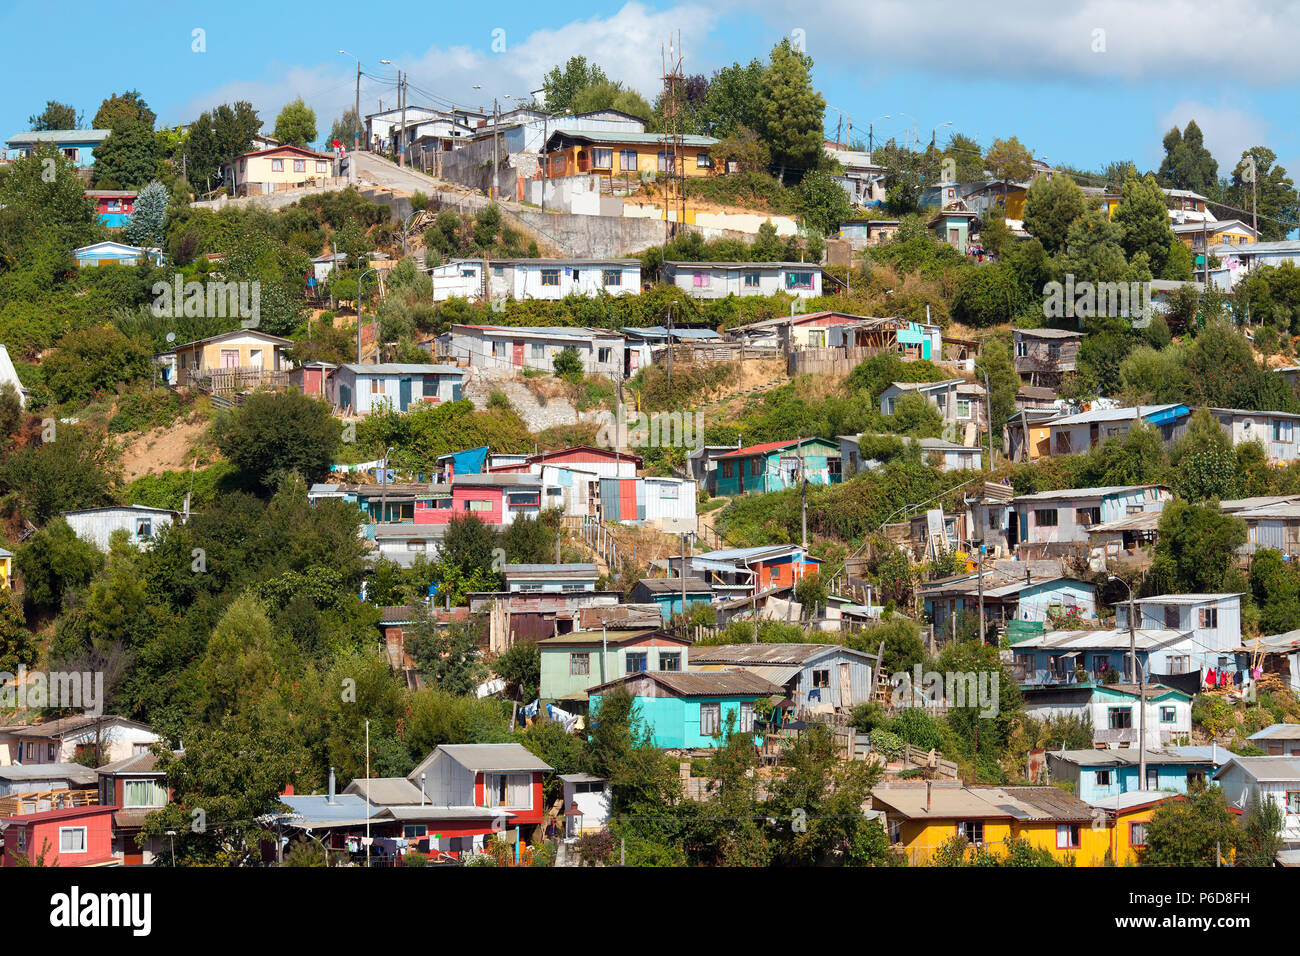 Poor houses on the hills of a small town named Tome, Bio Bio Region, Chile Stock Photo